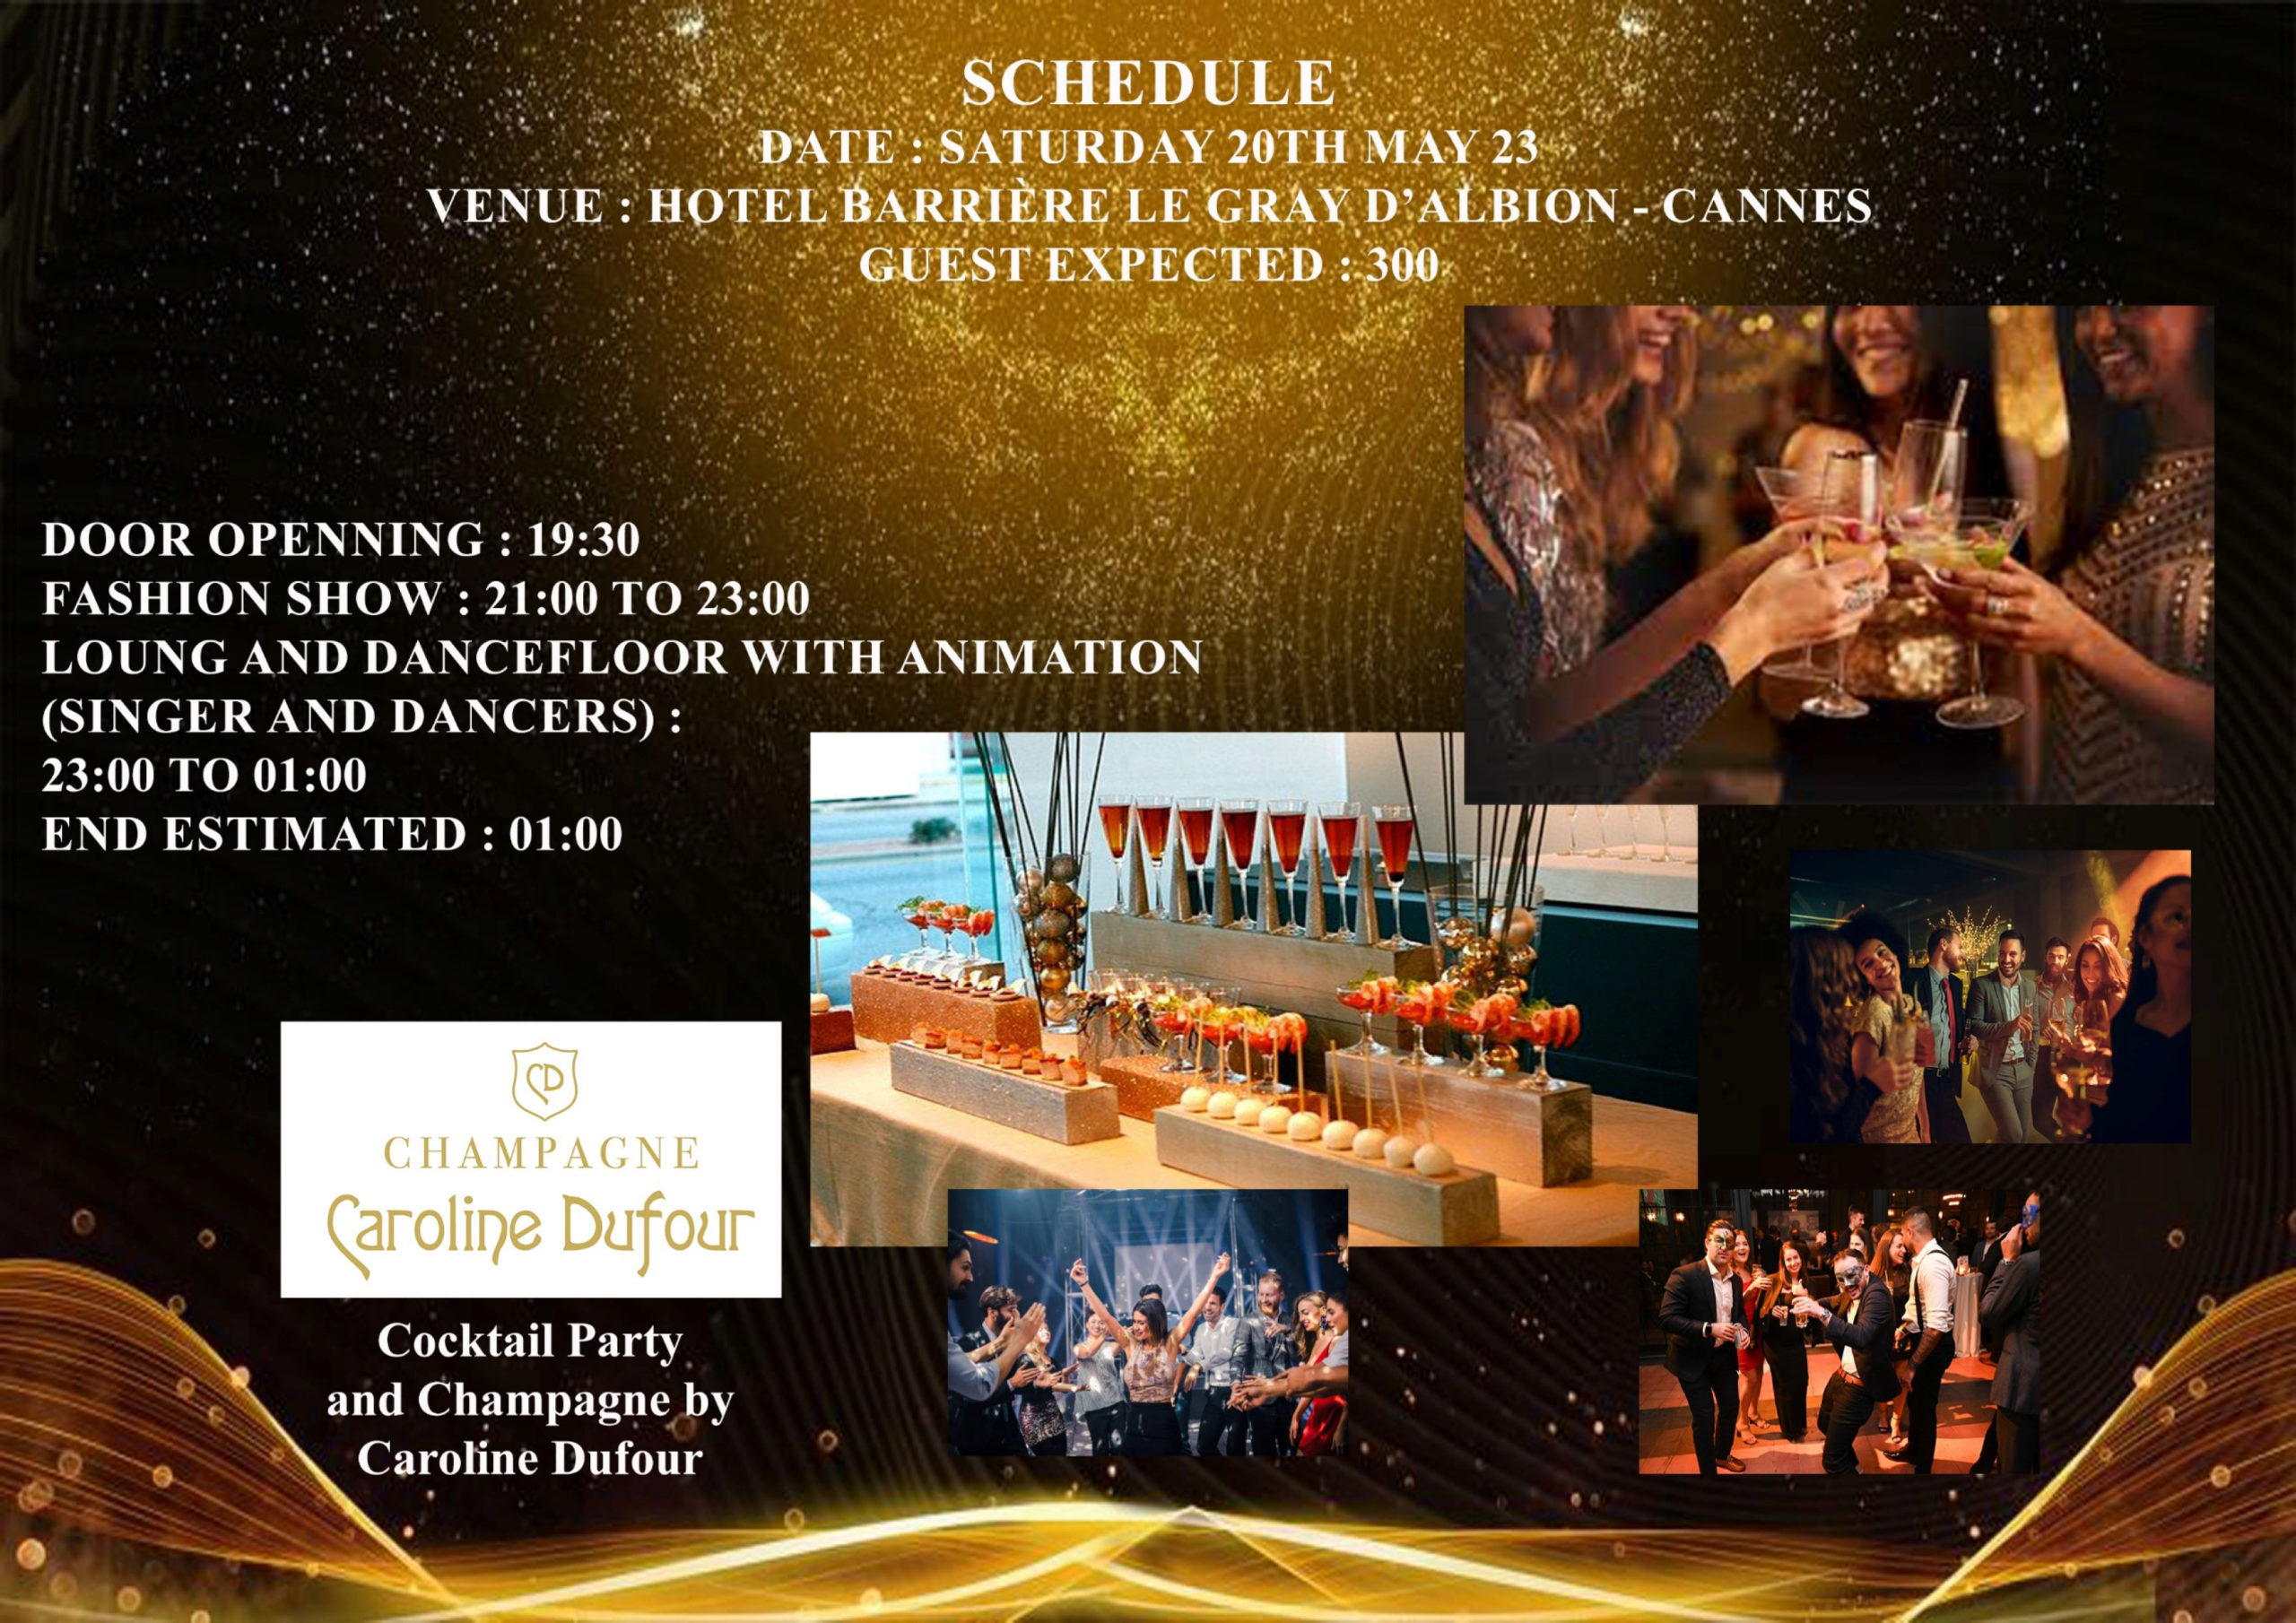 AEFW presents  FASHION TV - OFFICIAL FASHION PARTY SHOW IN CANNES-DN-AFRICA MEDIA PARTNER-SCHEDULE